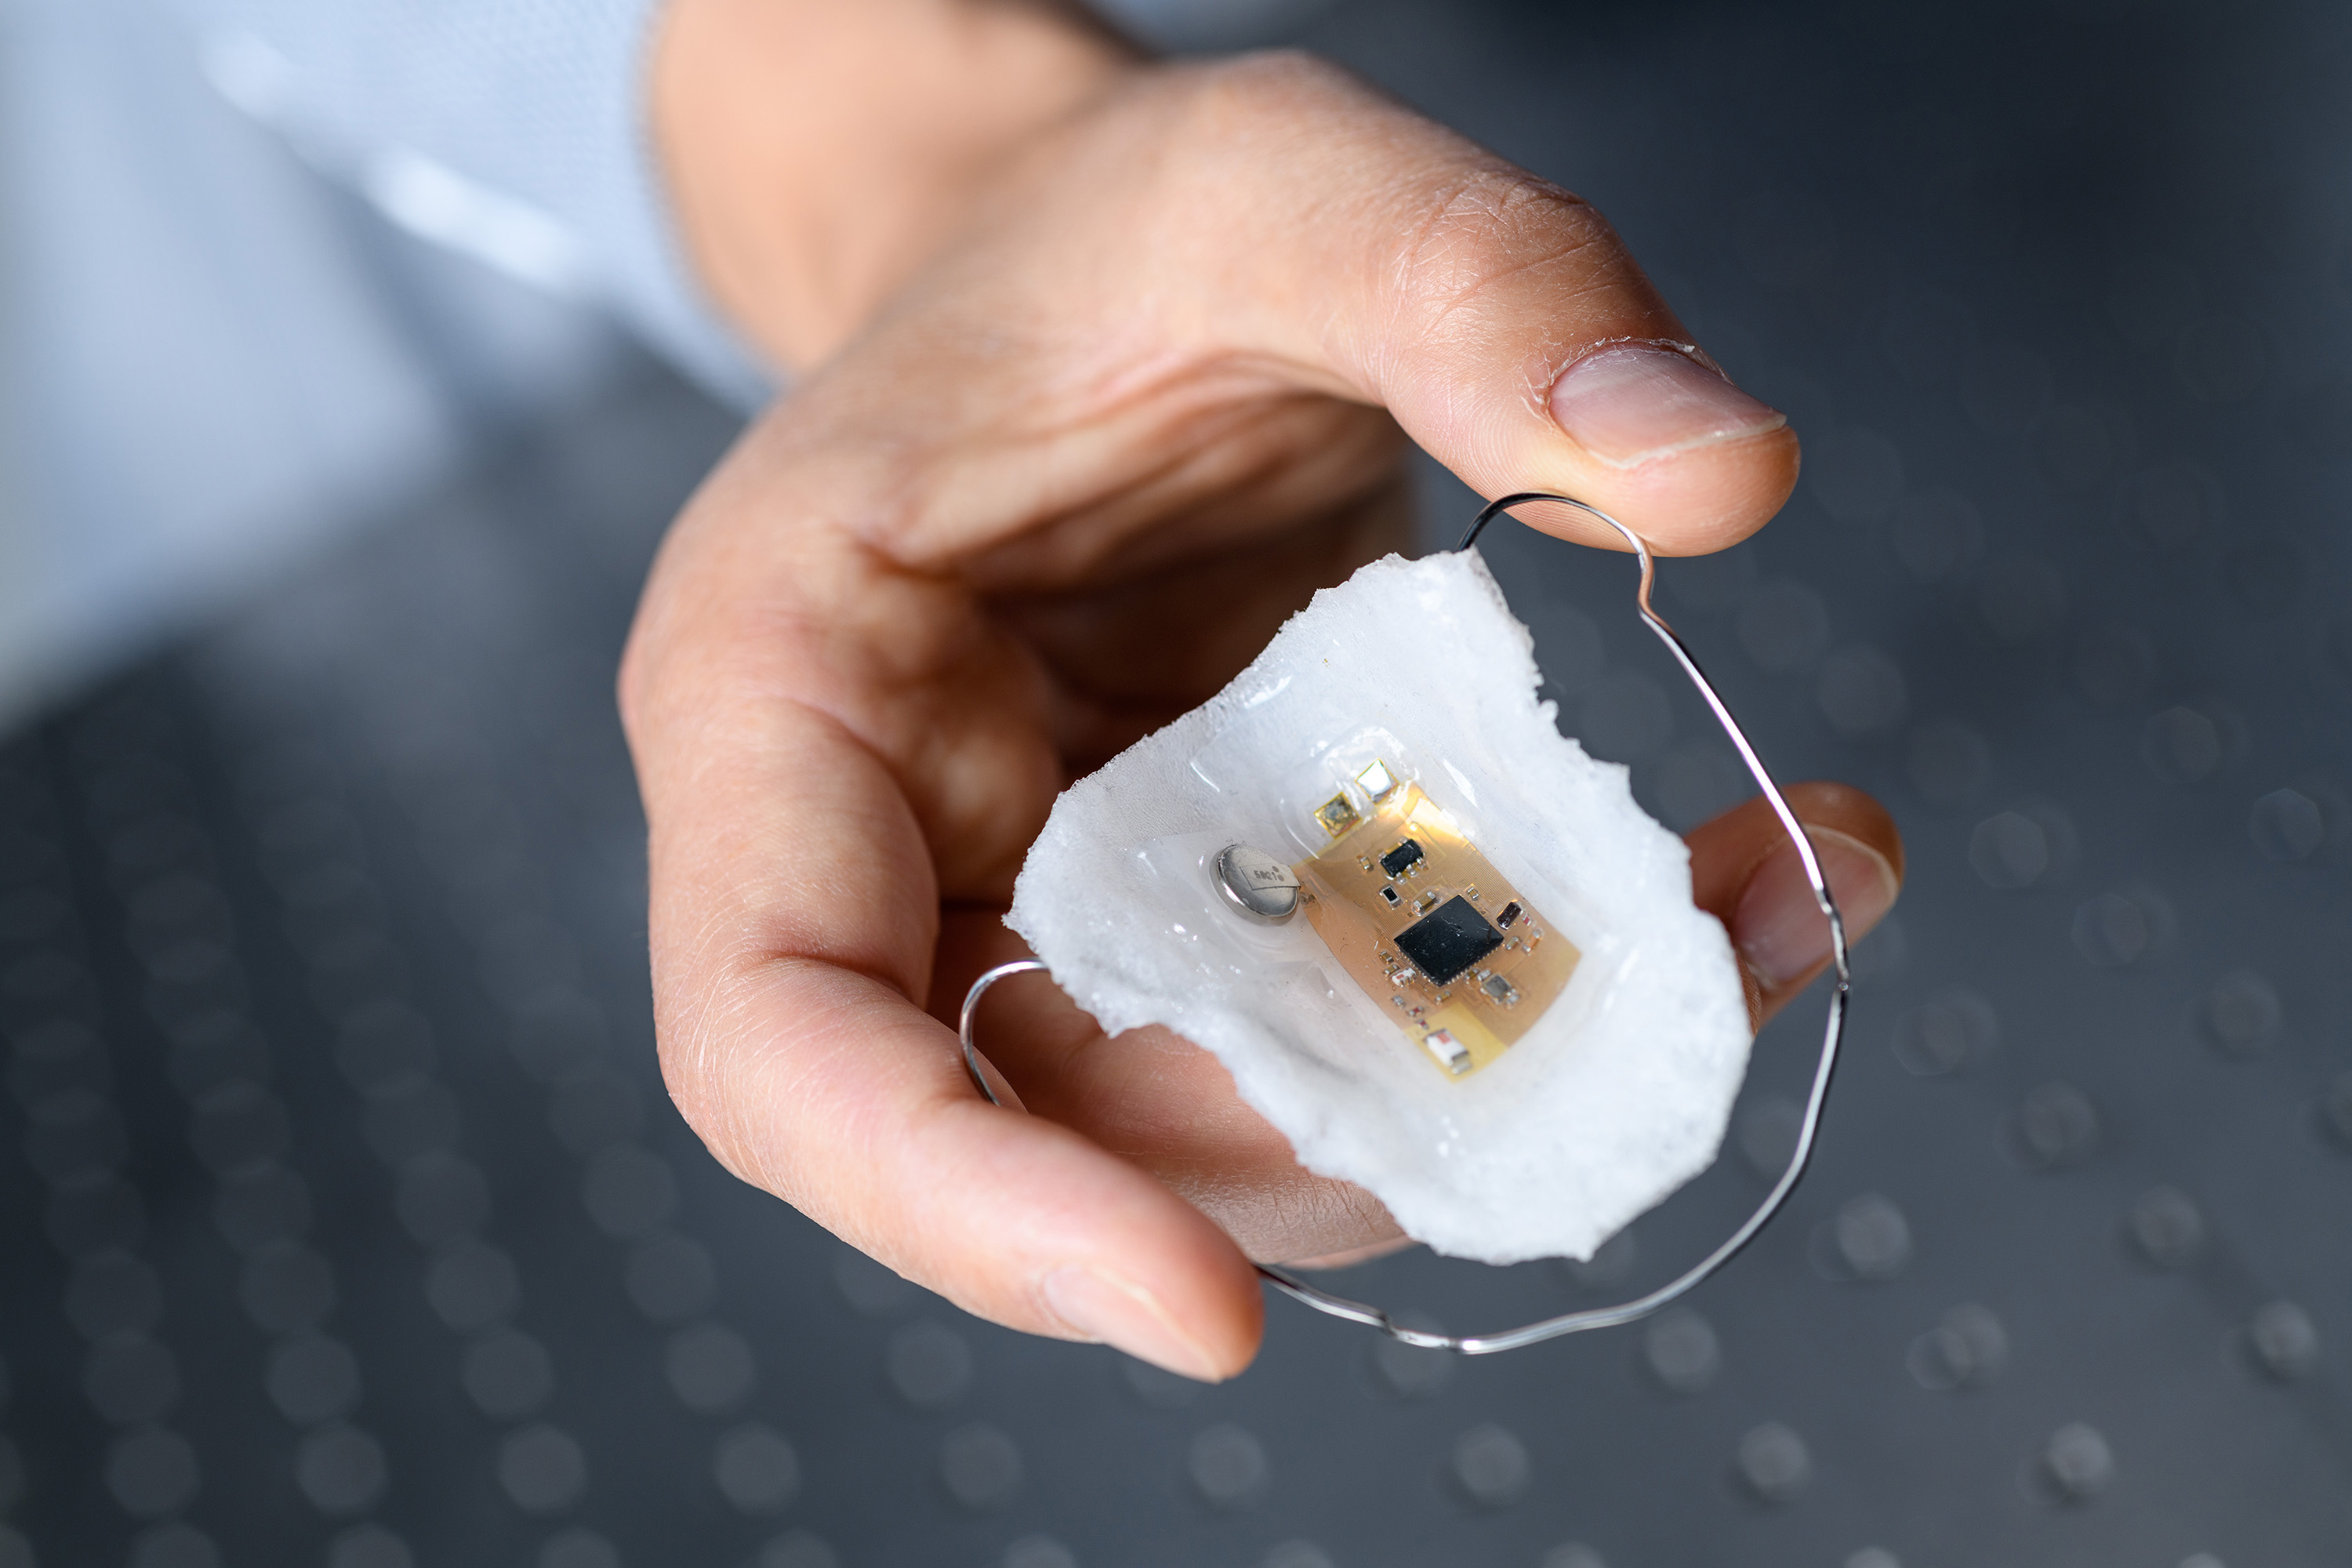 The intraoral electronics with a sodium sensor is based on a breathable elastomeric membrane that resembles a dental retainer. The ultrathin device is flexible and stretchable, and can wirelessly transmit data up to 10 meters. (Credit: Rob Felt, Georgia Tech).